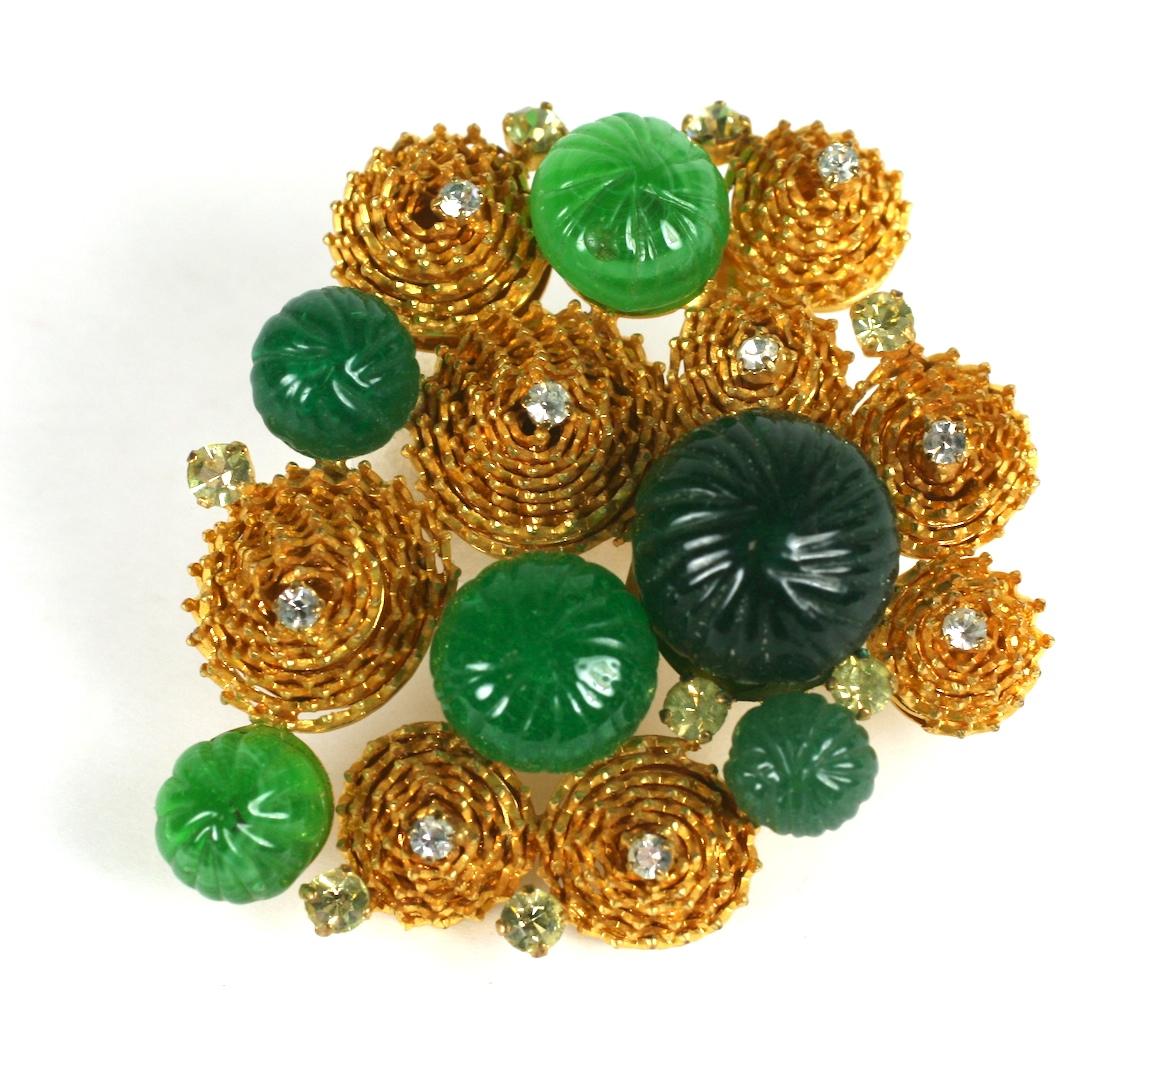 Maison Gripoix for Yves Saint Laurent Haute Couture sea urchin brooch. Of emerald light and dark mellon cut Gripoix glass cabochons, prong set citrine and crystal pastes and fine gilded coiled chain and wire work. Hand made.
Excellent Condition,